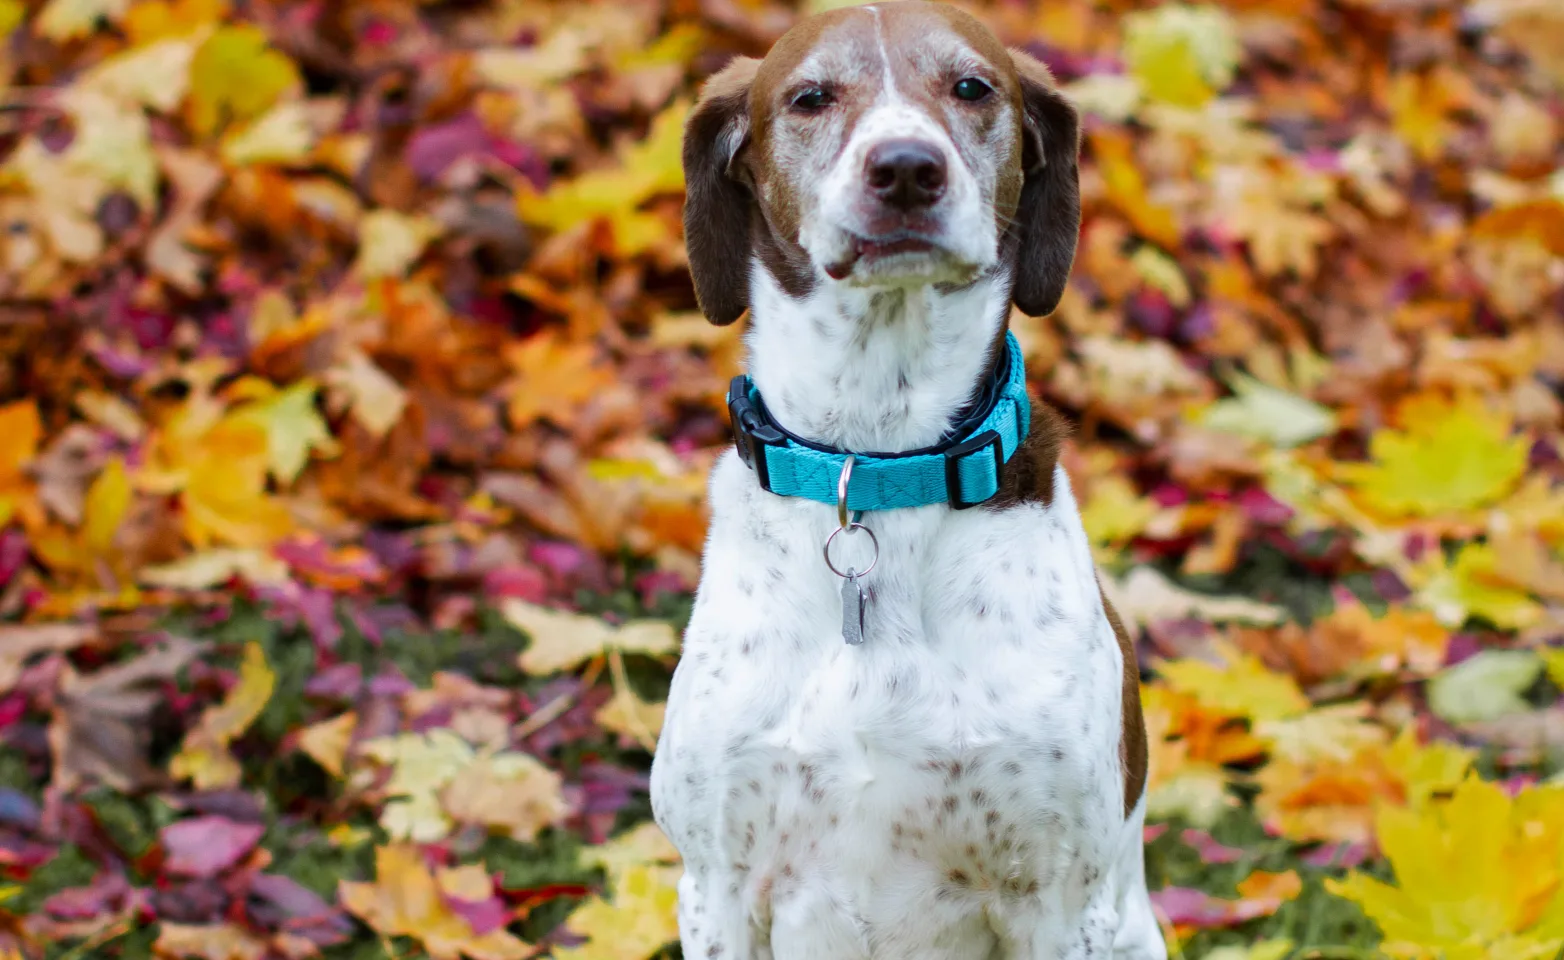 White and brown dog sitting in a bed of fall leaves in a park.